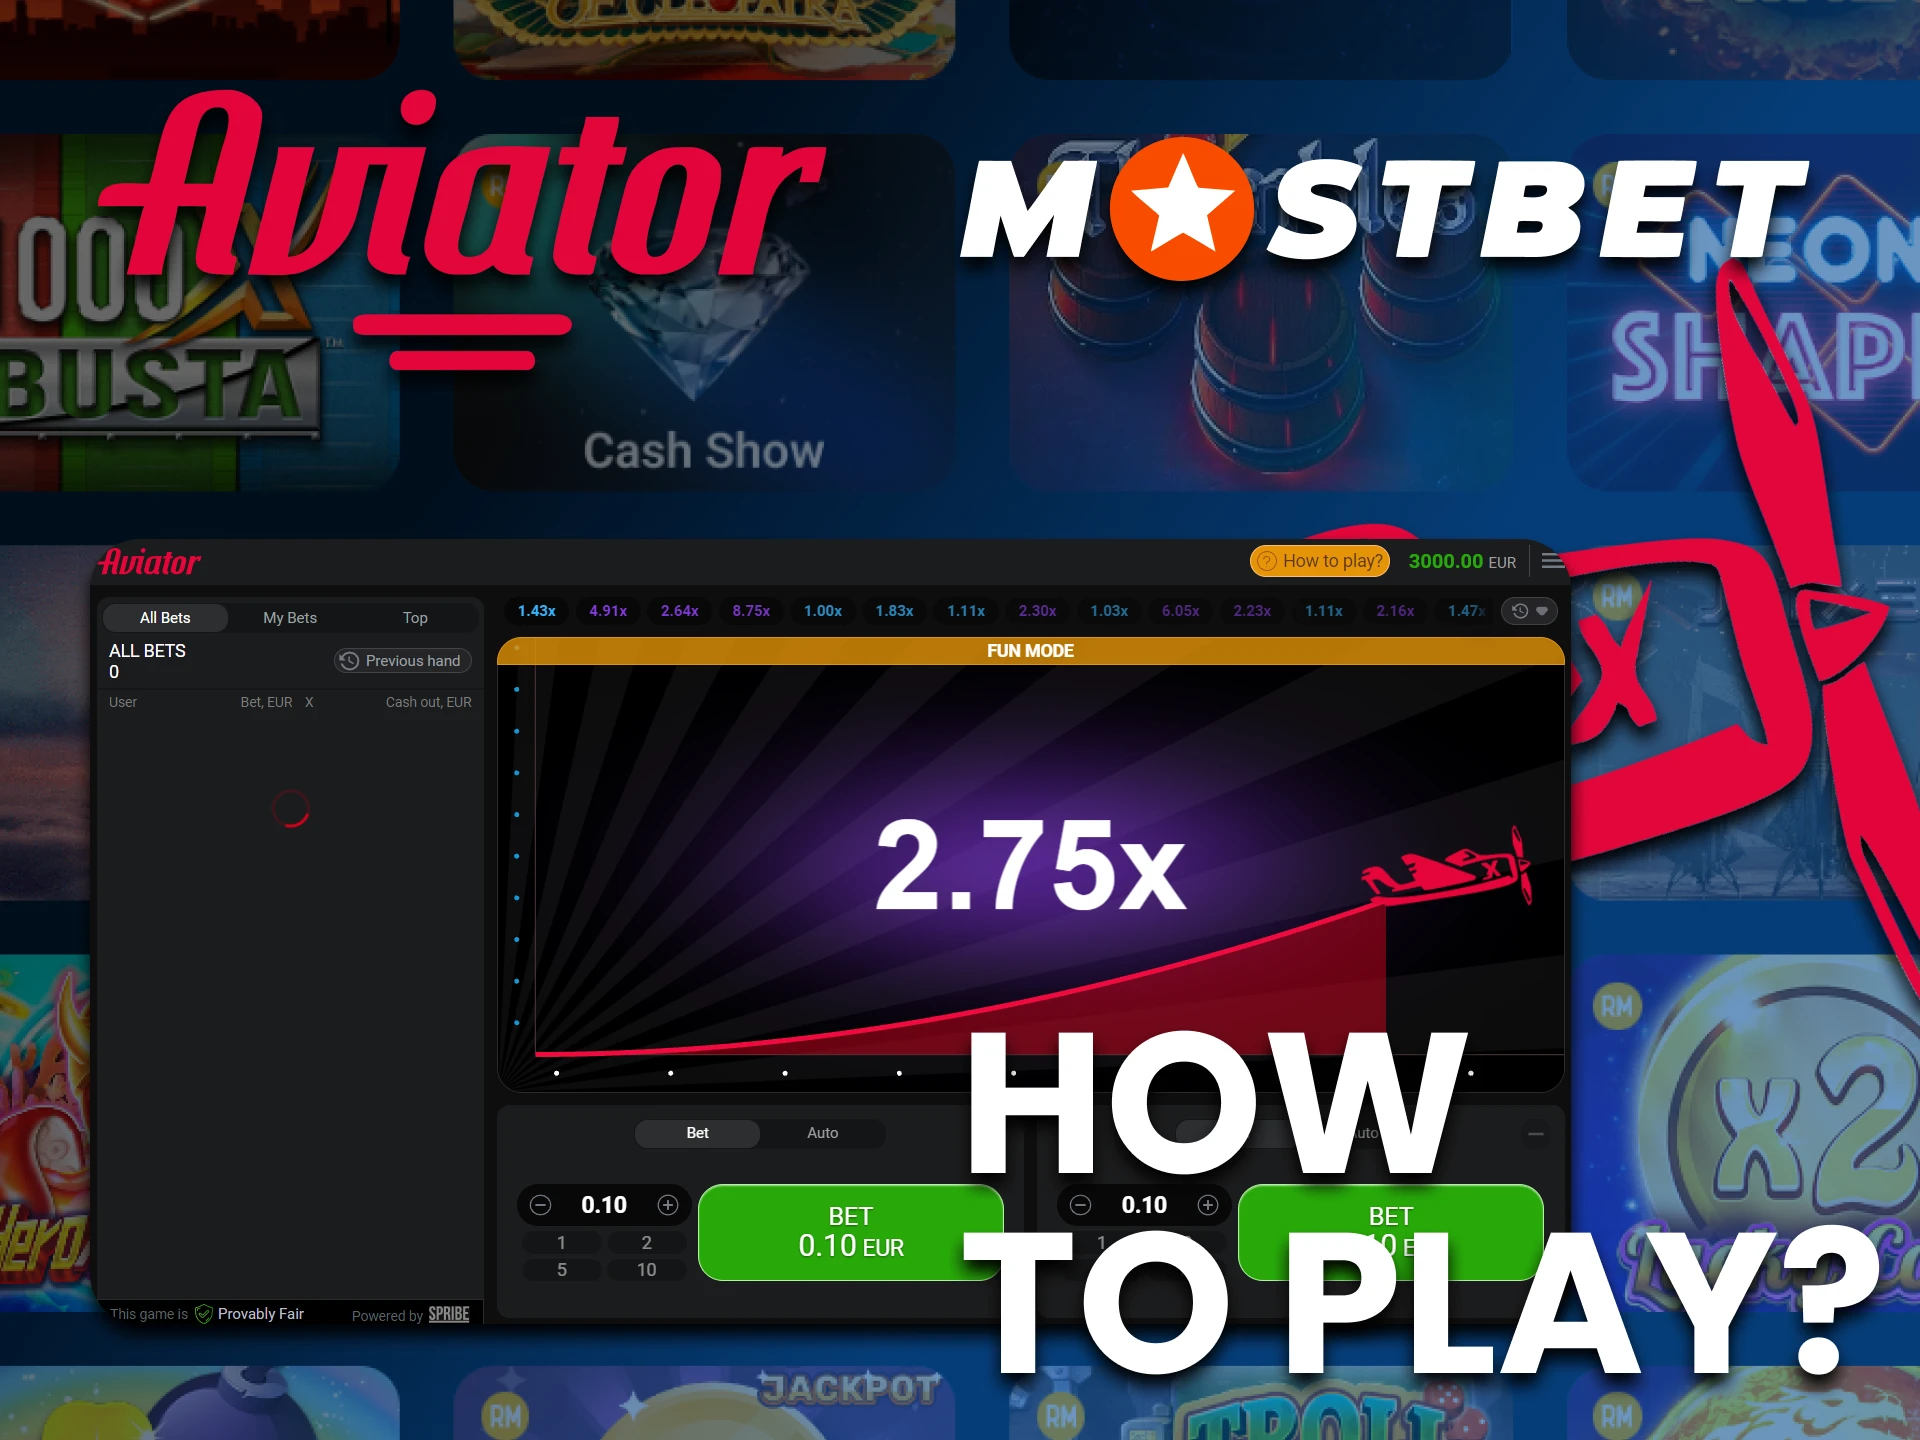 Best Make Mostbet bookmaker in Turkey You Will Read in 2021